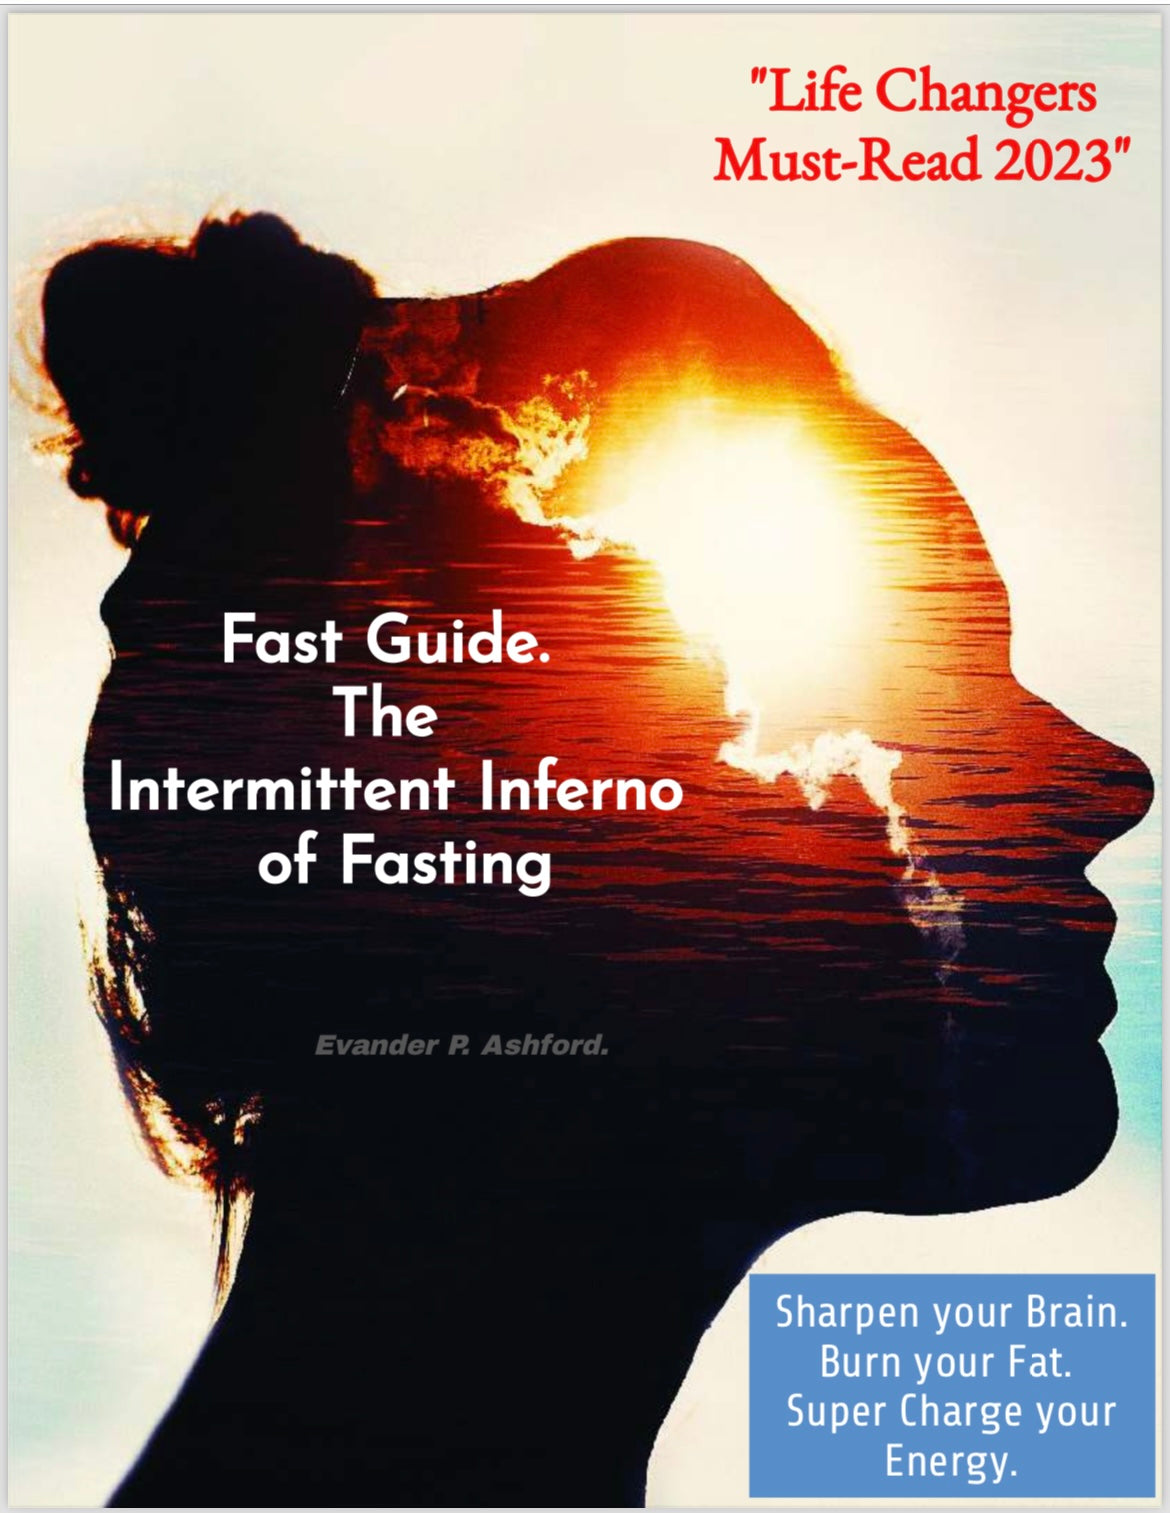 Fast Guide. The Intermittent Inferno of Fasting